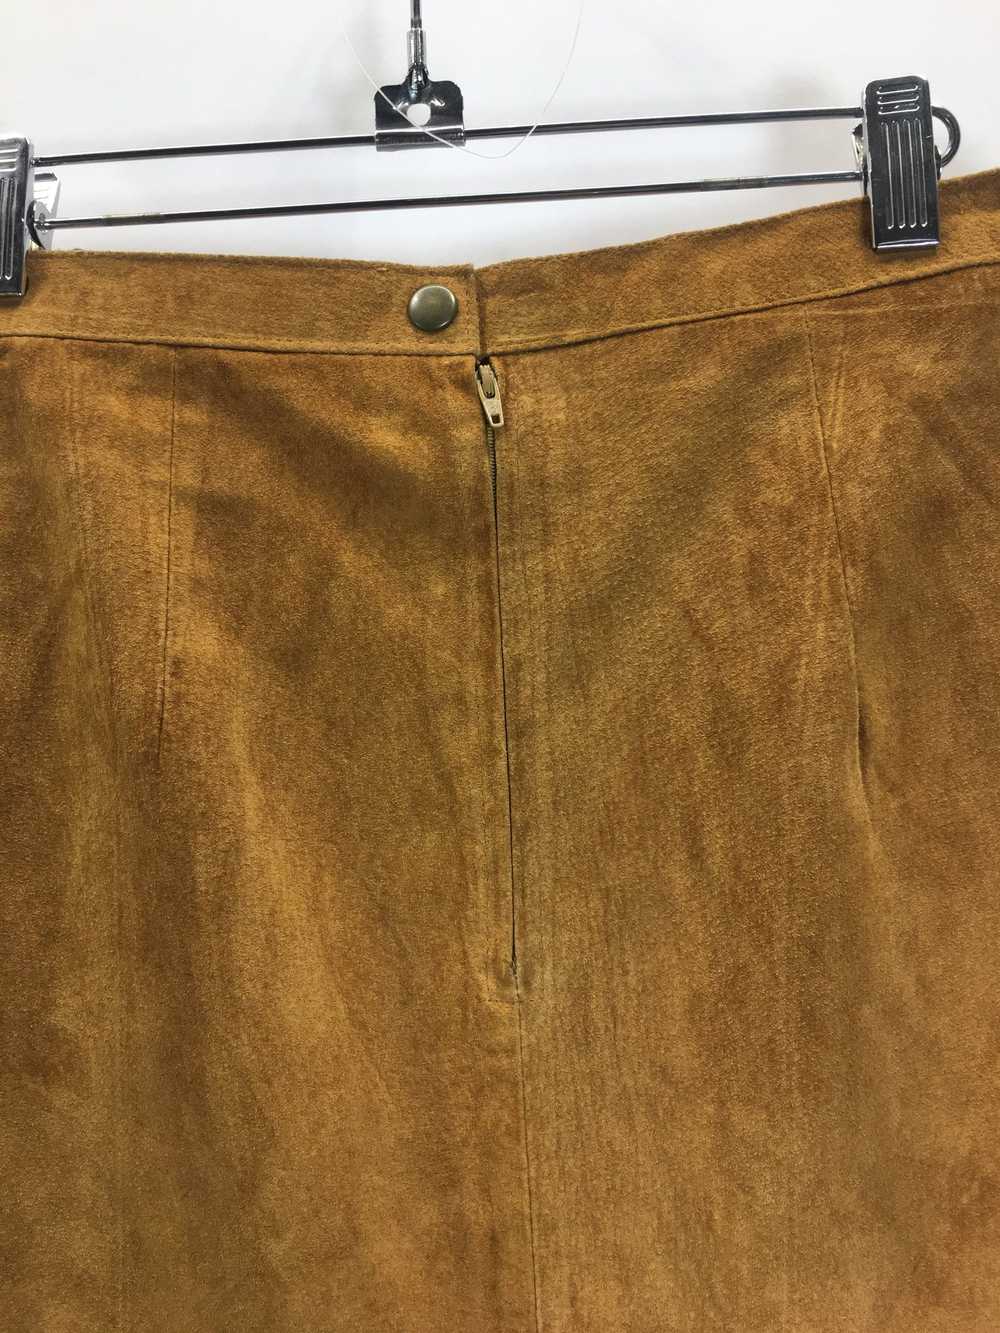 90’s Suede Skirt - image 2